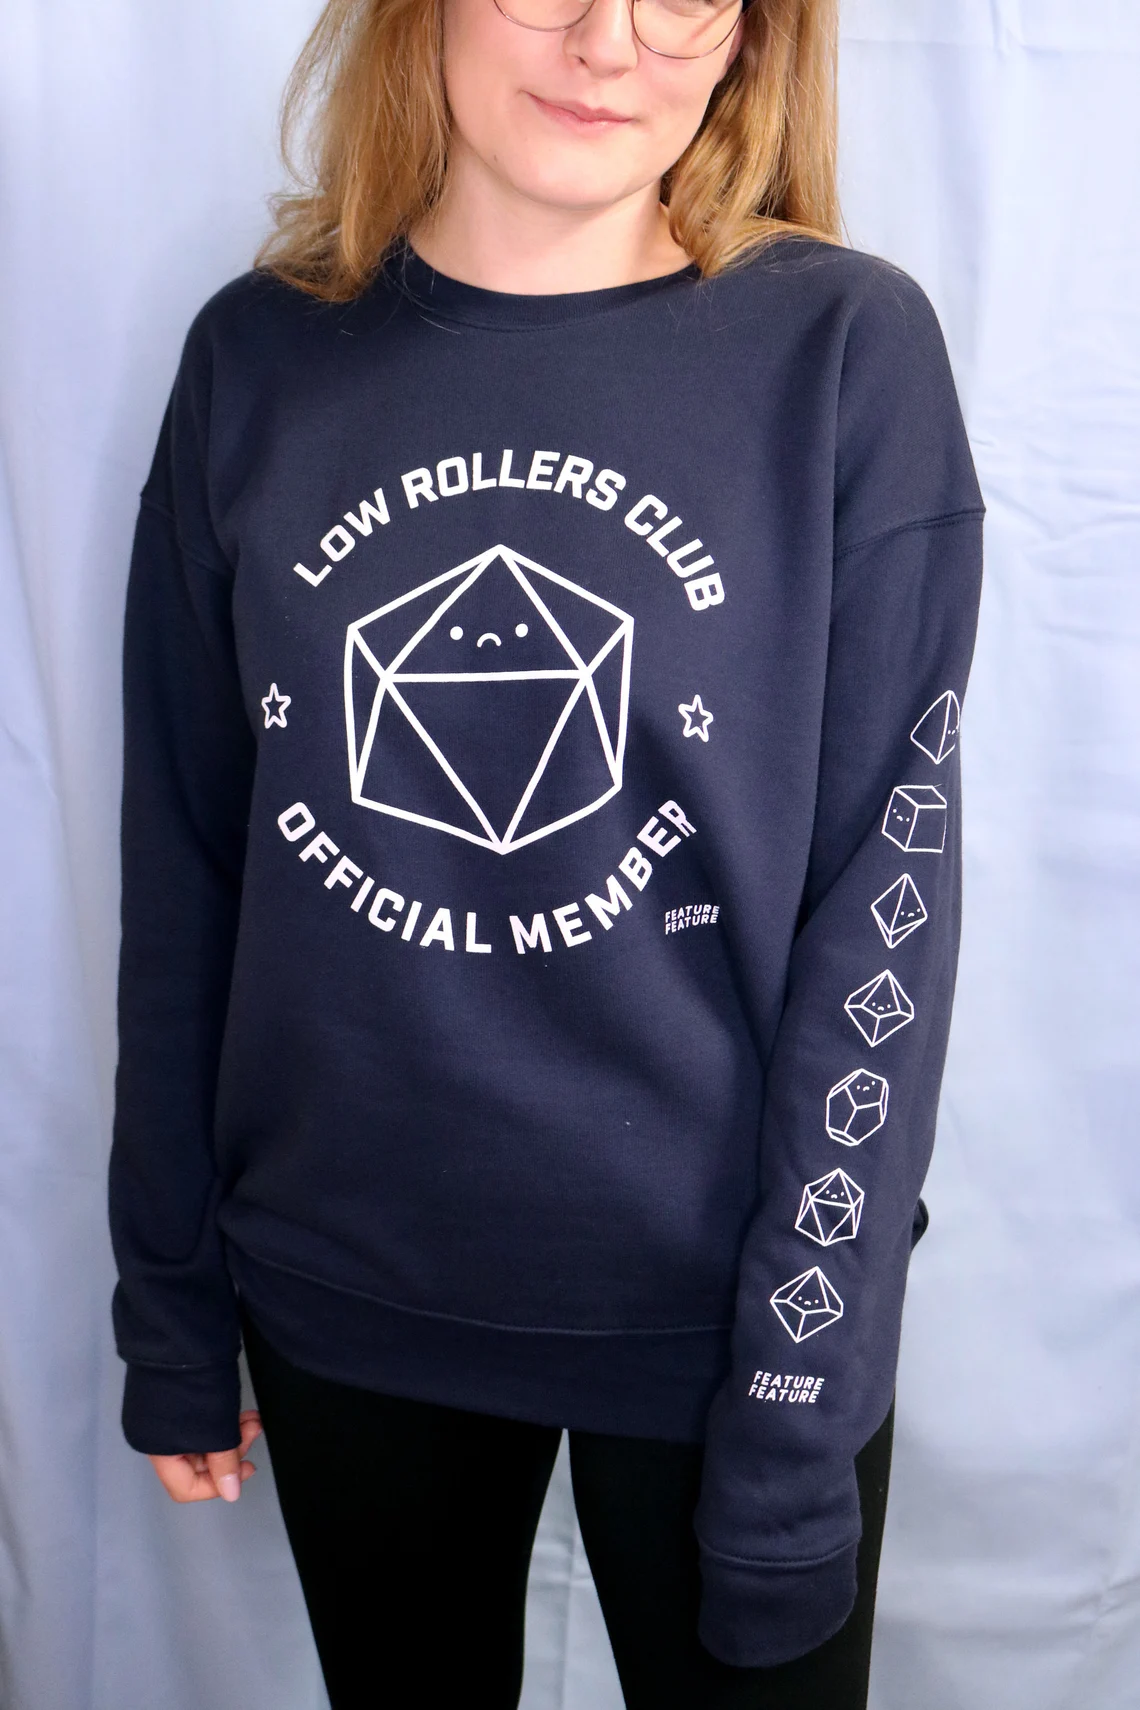 photo of a person wearing a grey shirt with an illustration of sad dice on the front and down the left sleeve. around the dice on the front is the text, "low rollers club official member"